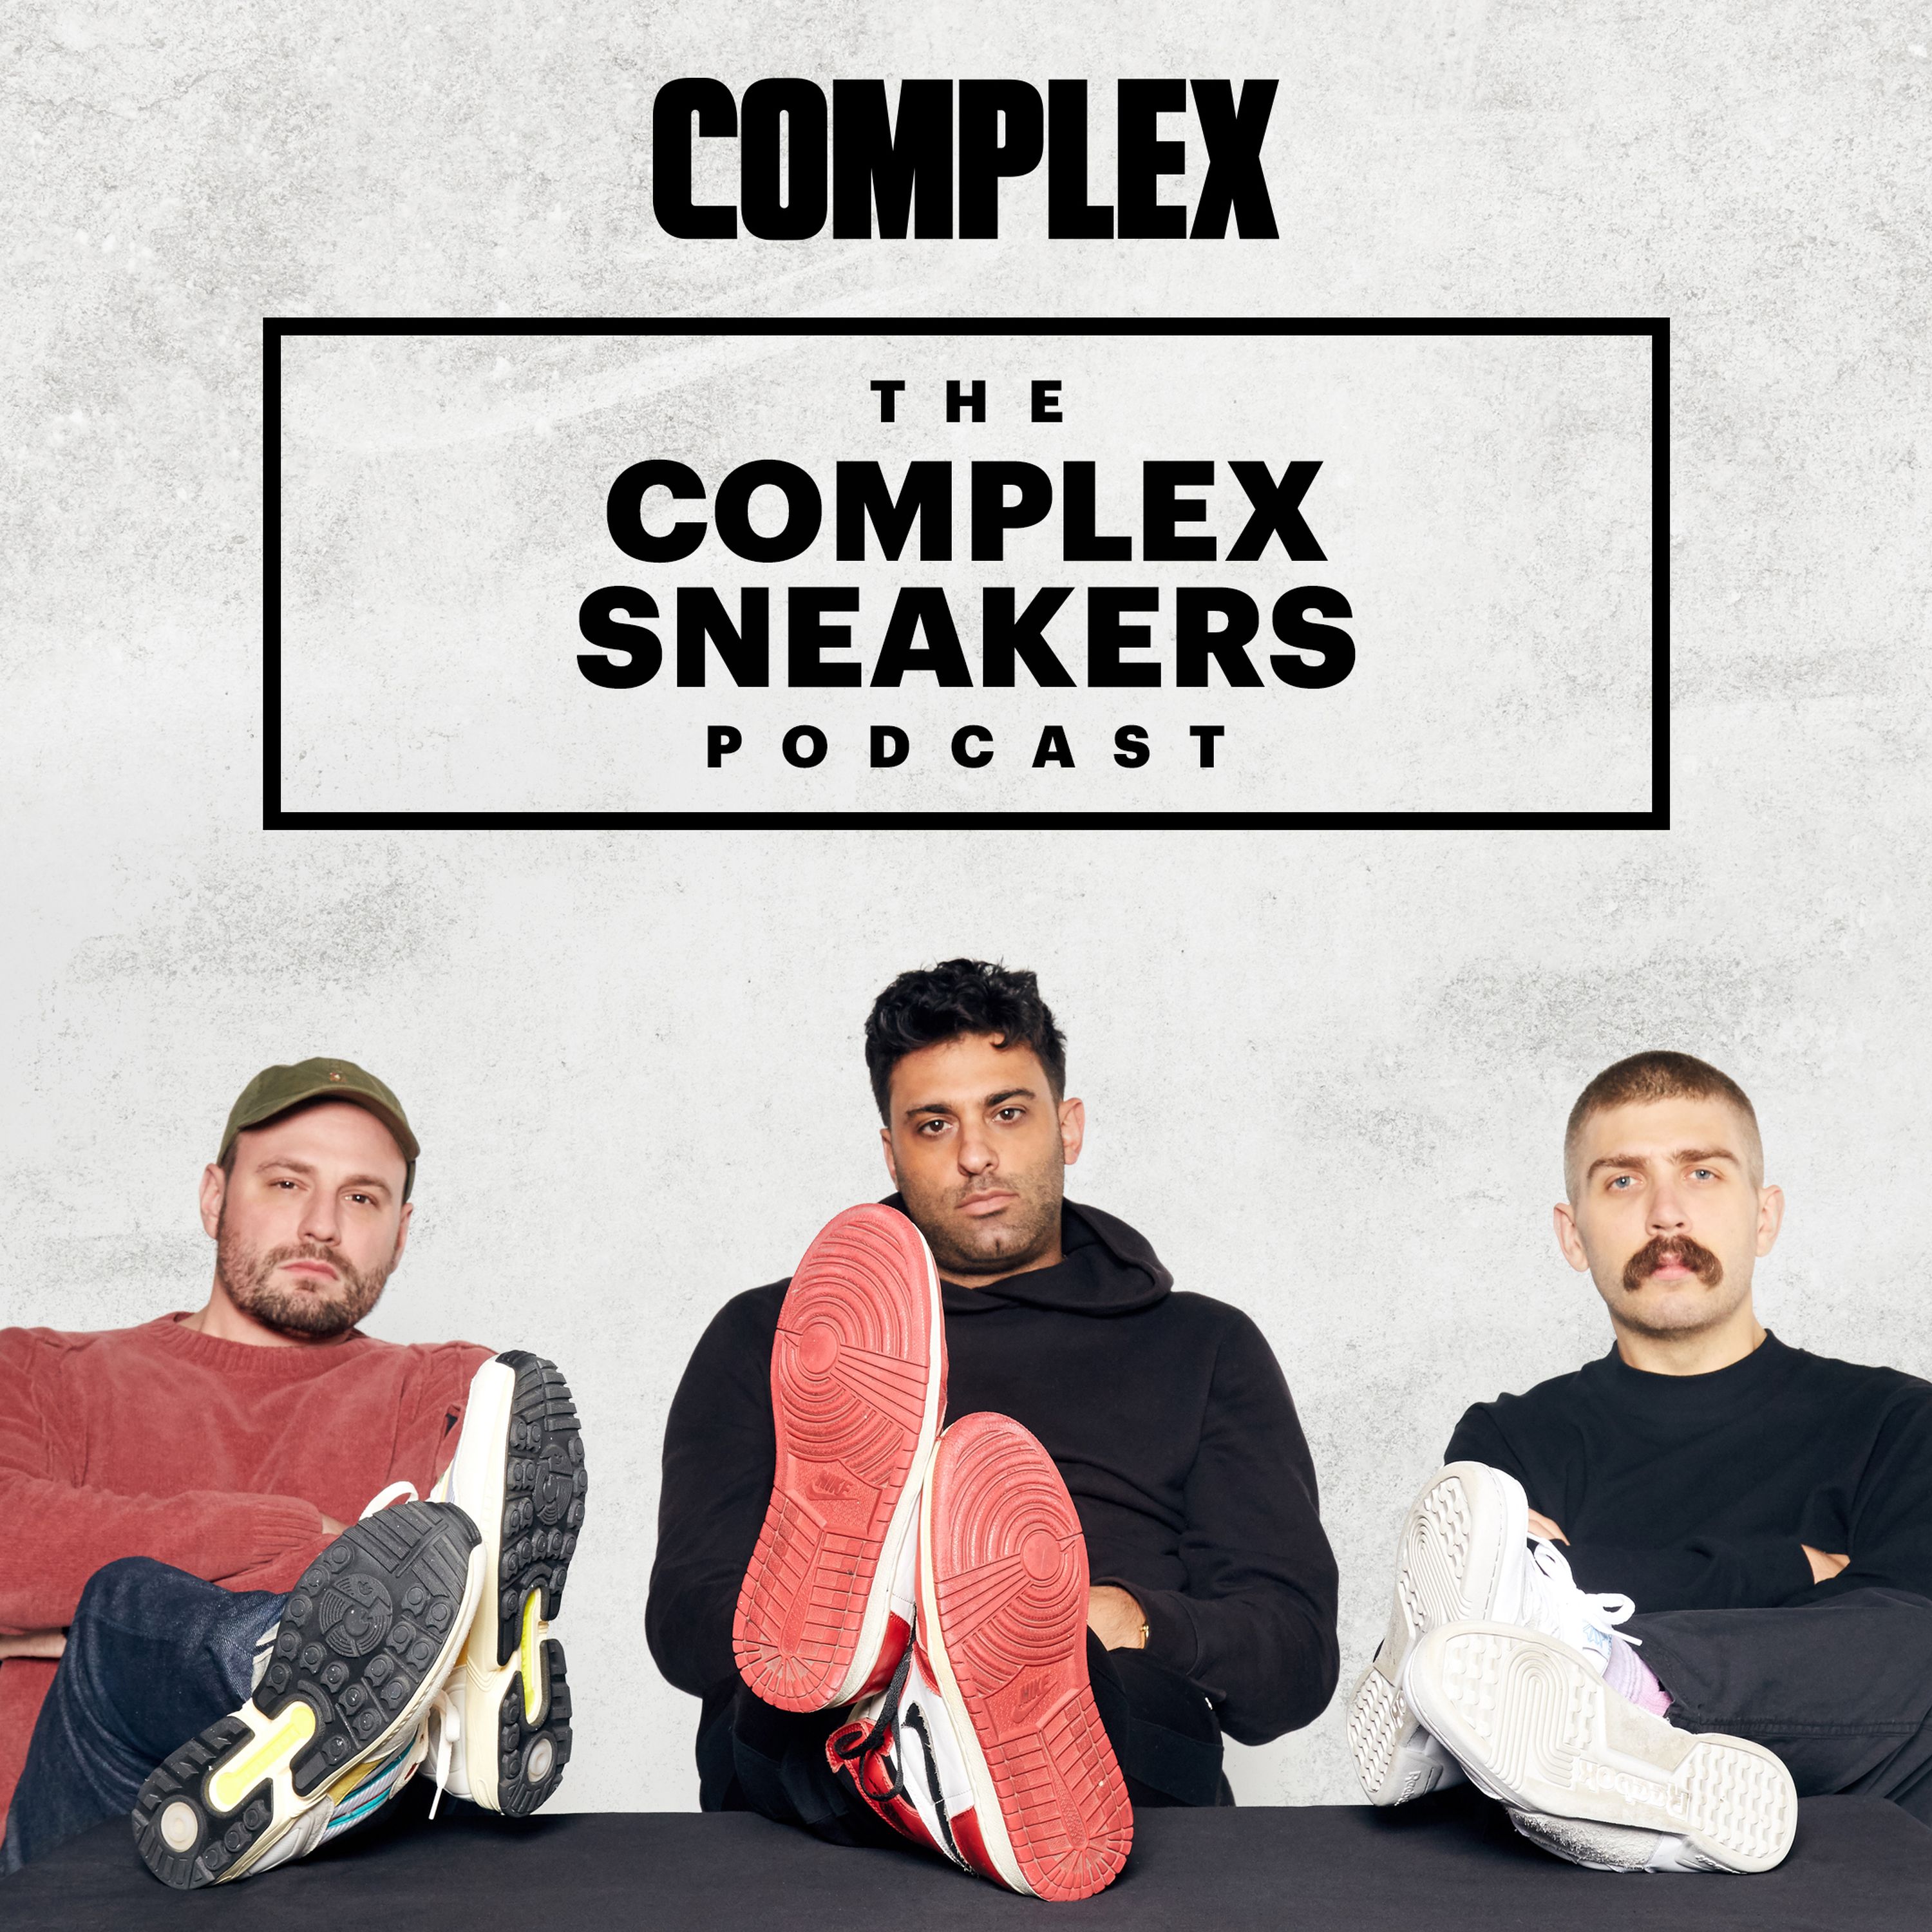 Are NFT Sneakers for Real or Just a Scam? Bobby Hundreds Explains